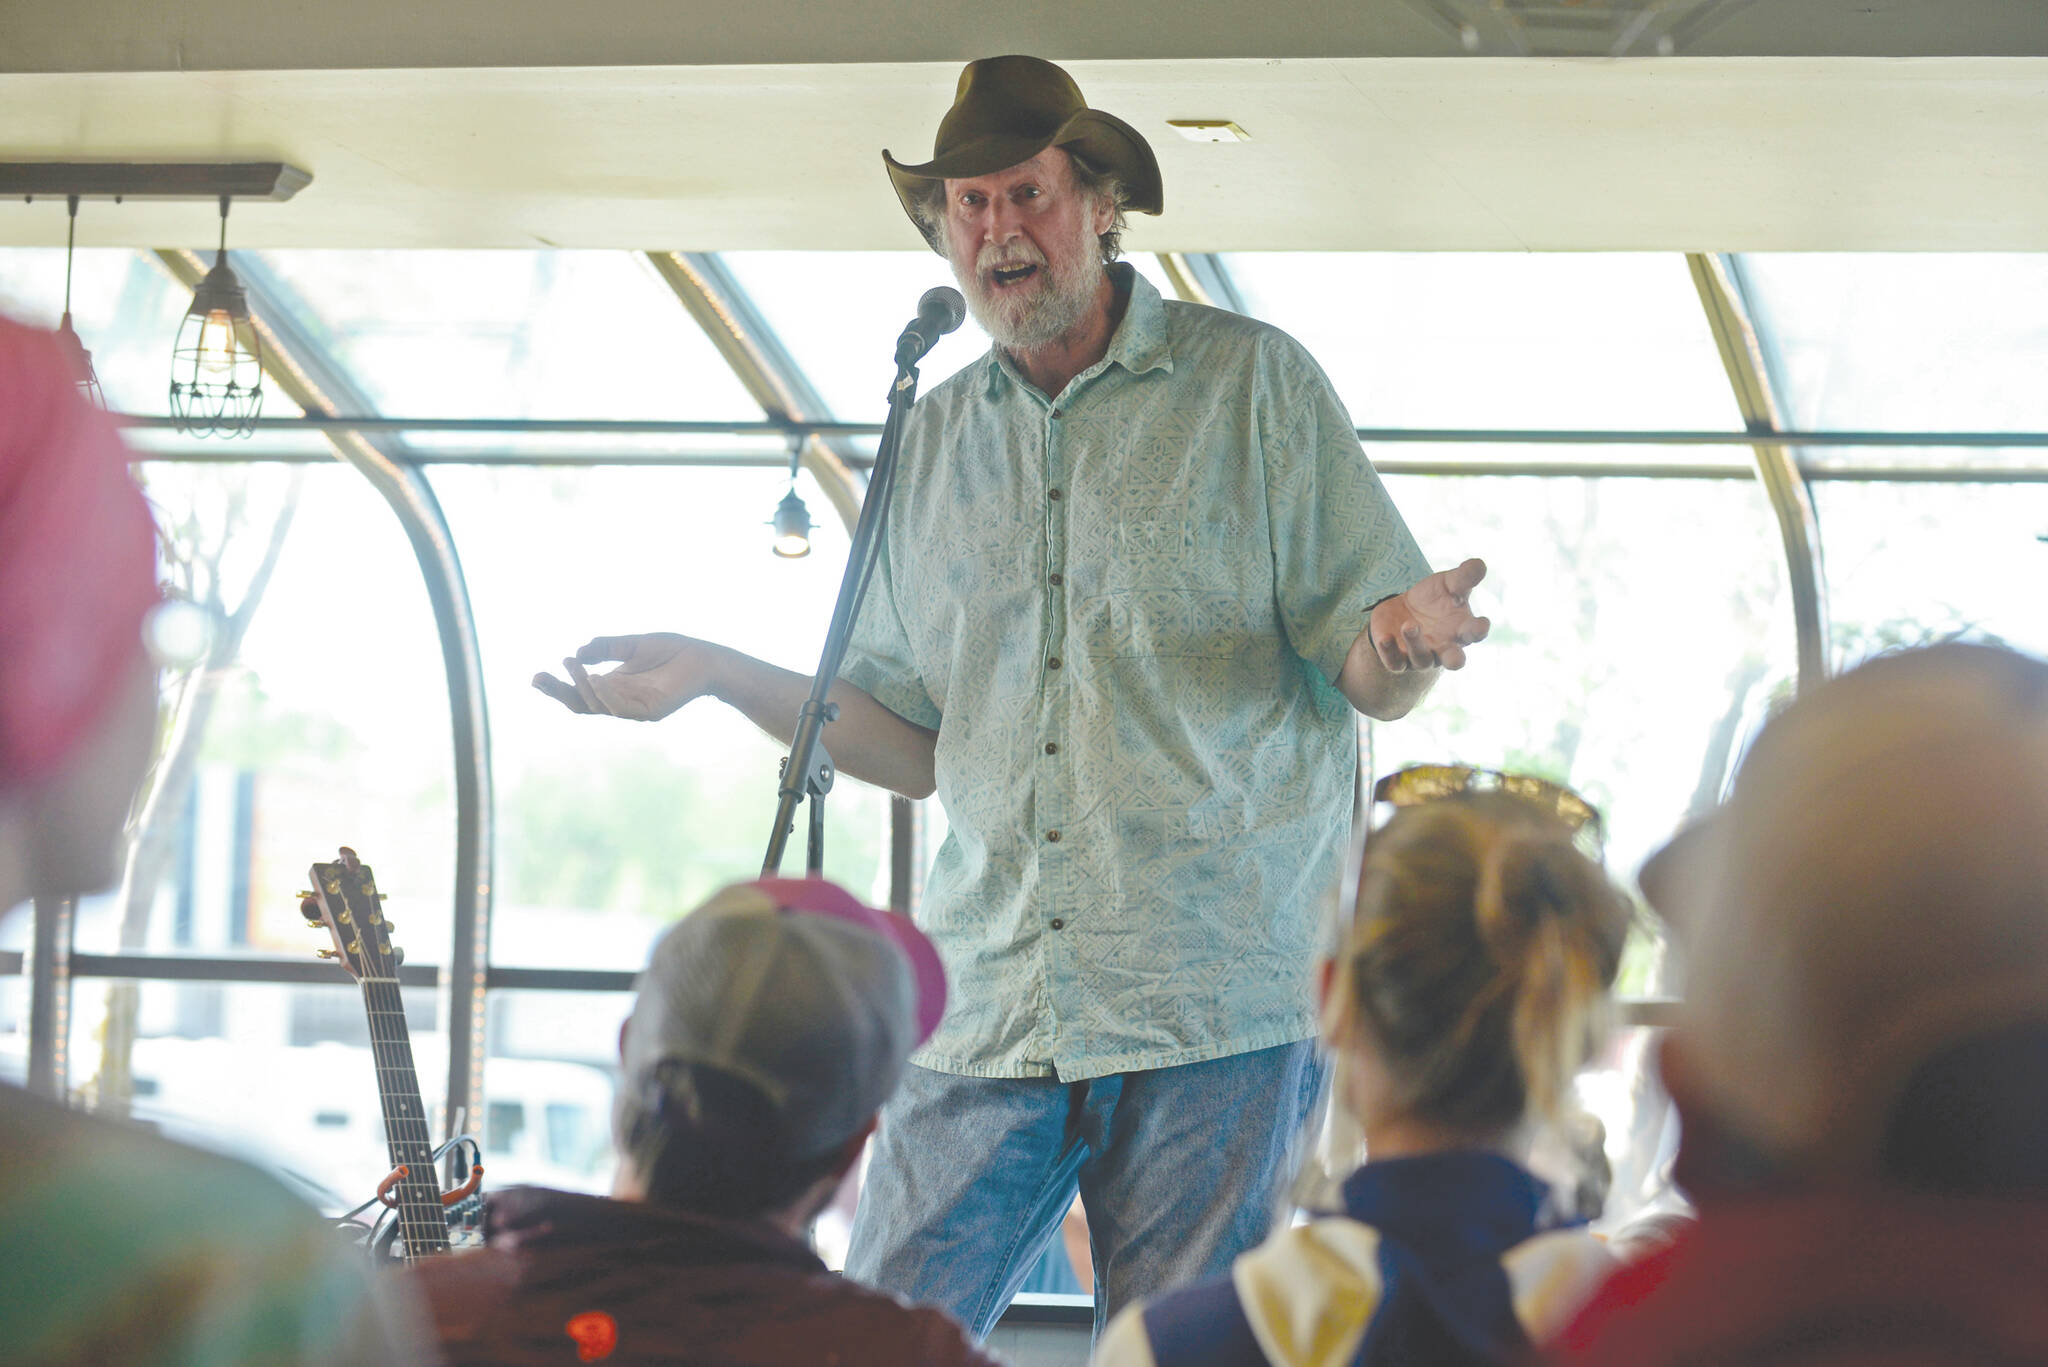 Bill Holt tells a fishing tale at Odie’s Deli on Friday, June 2, 2017, in Soldotna, Alaska. Holt was among the seven storytellers in the True Tales Told Live, an occasional storytelling event co-founded by Pegge Erkeneff, Jenny Nyman and Kaitlin Vadla. (Ben Boettger/Peninsula Clarion file)